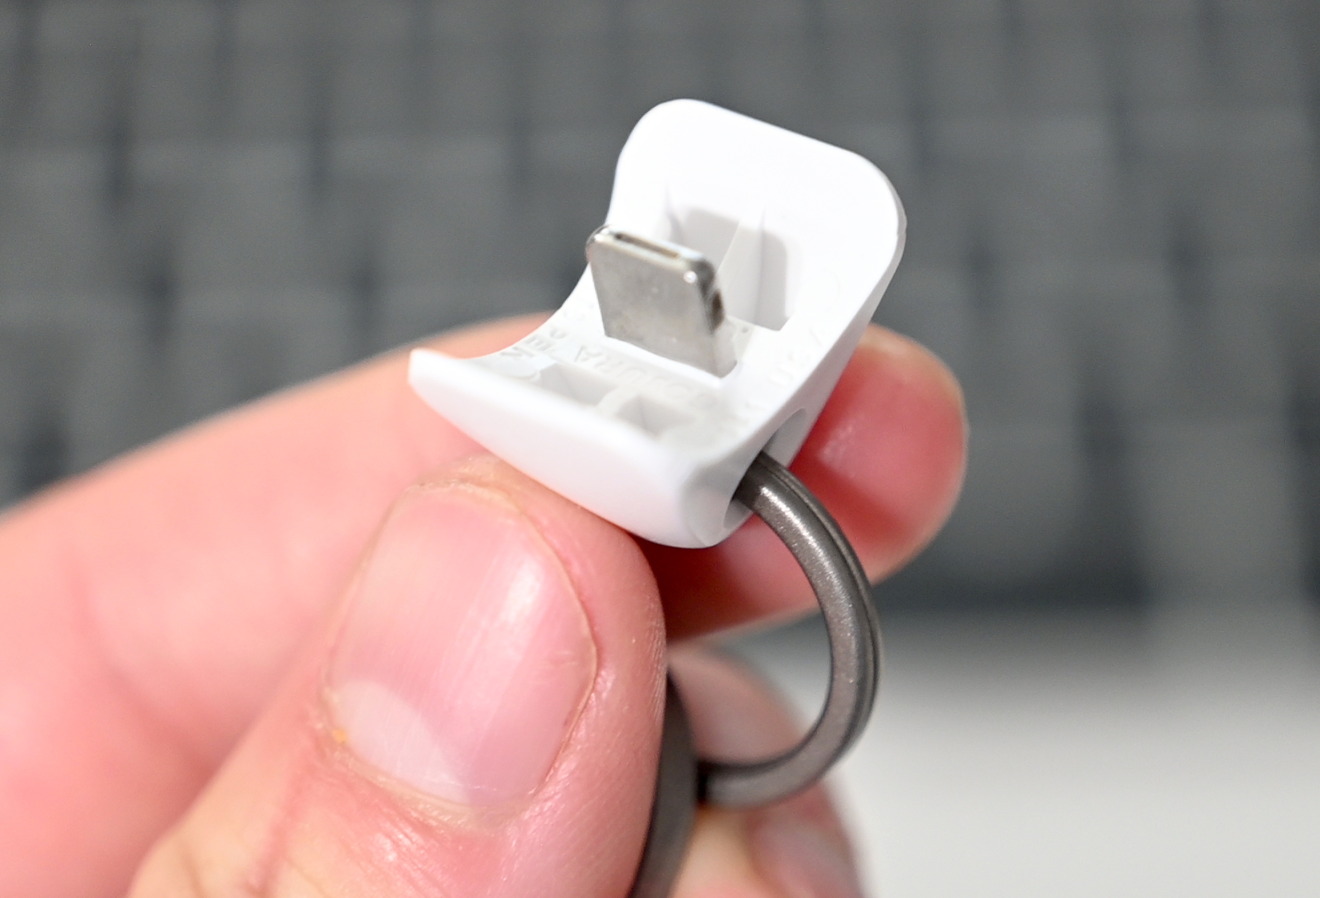 Anchor connects to the AirPods Lightning port